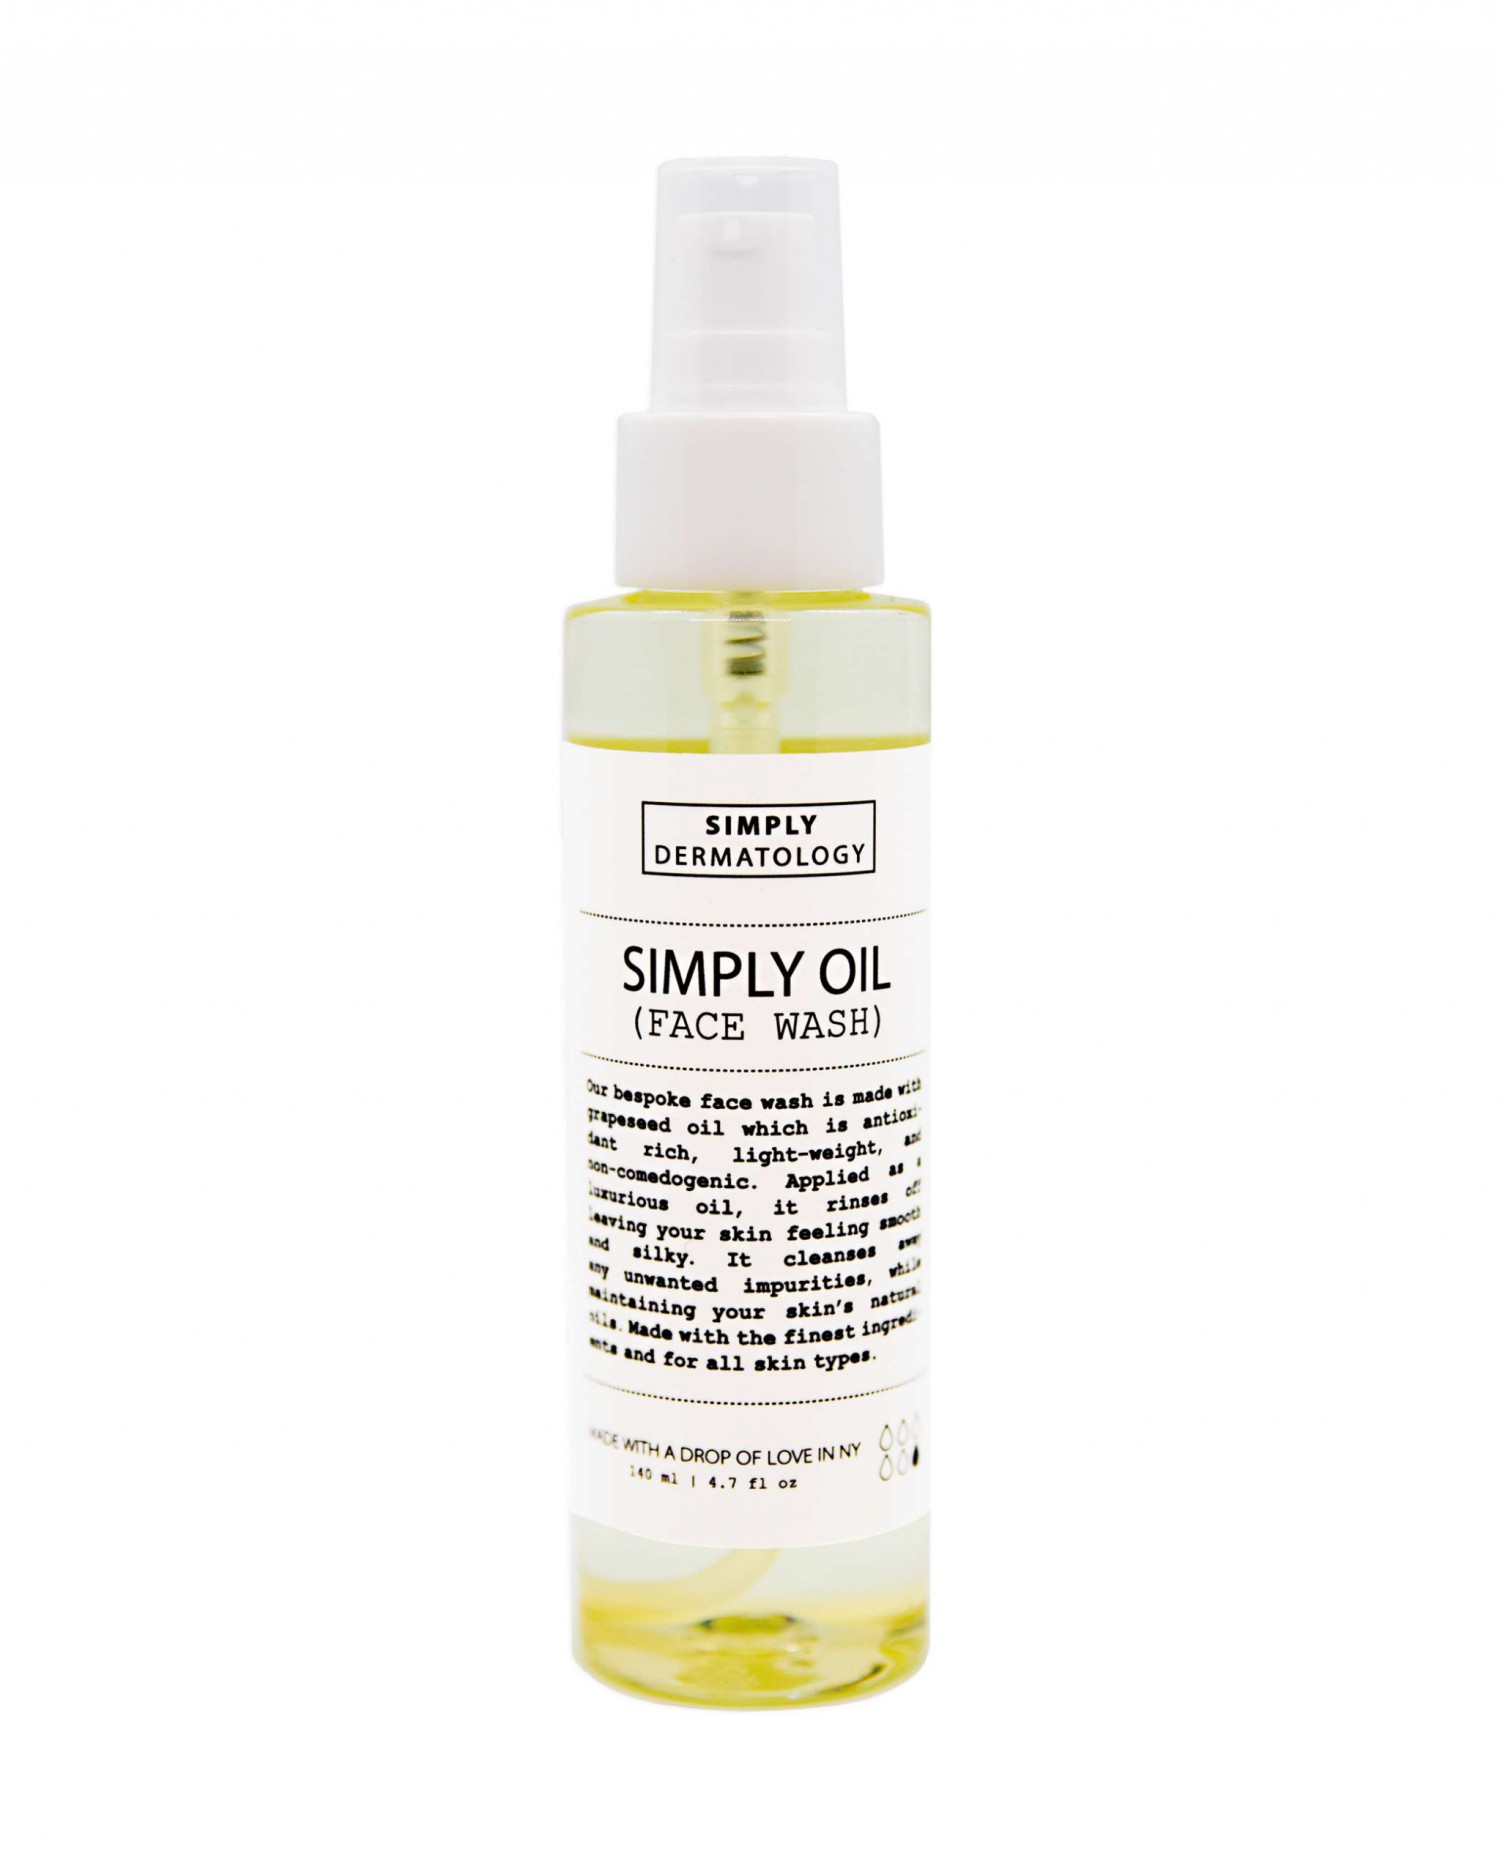 Simply Oil Face Wash bottle